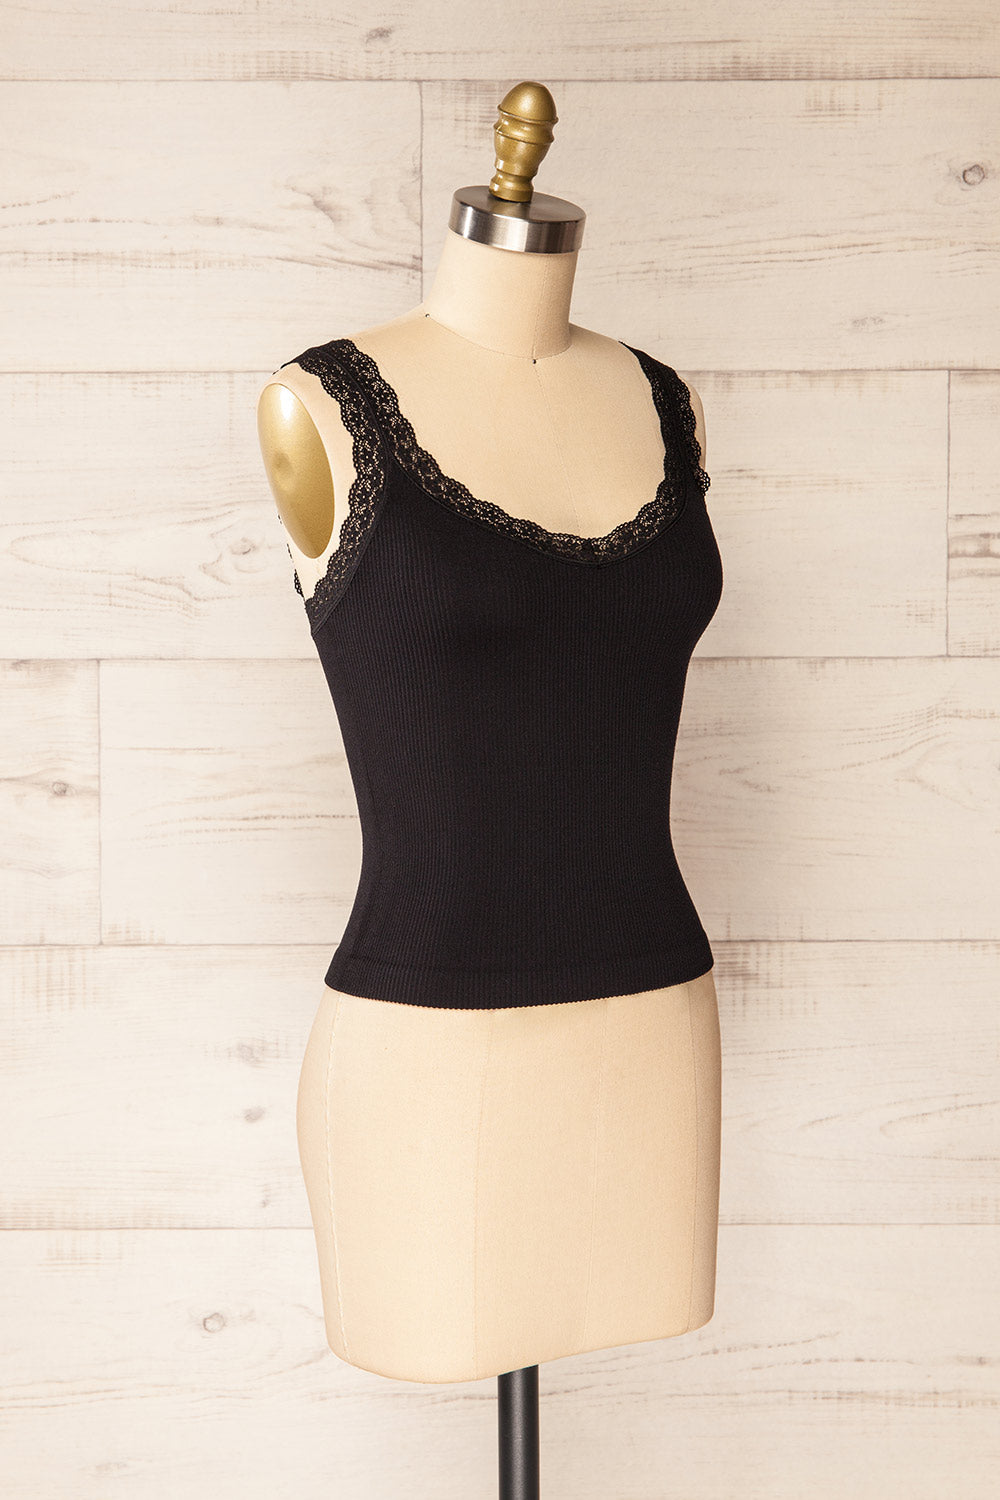 Somensac Black Ribbed Camisole w/ Lace Trim | Boutique 1861 side view